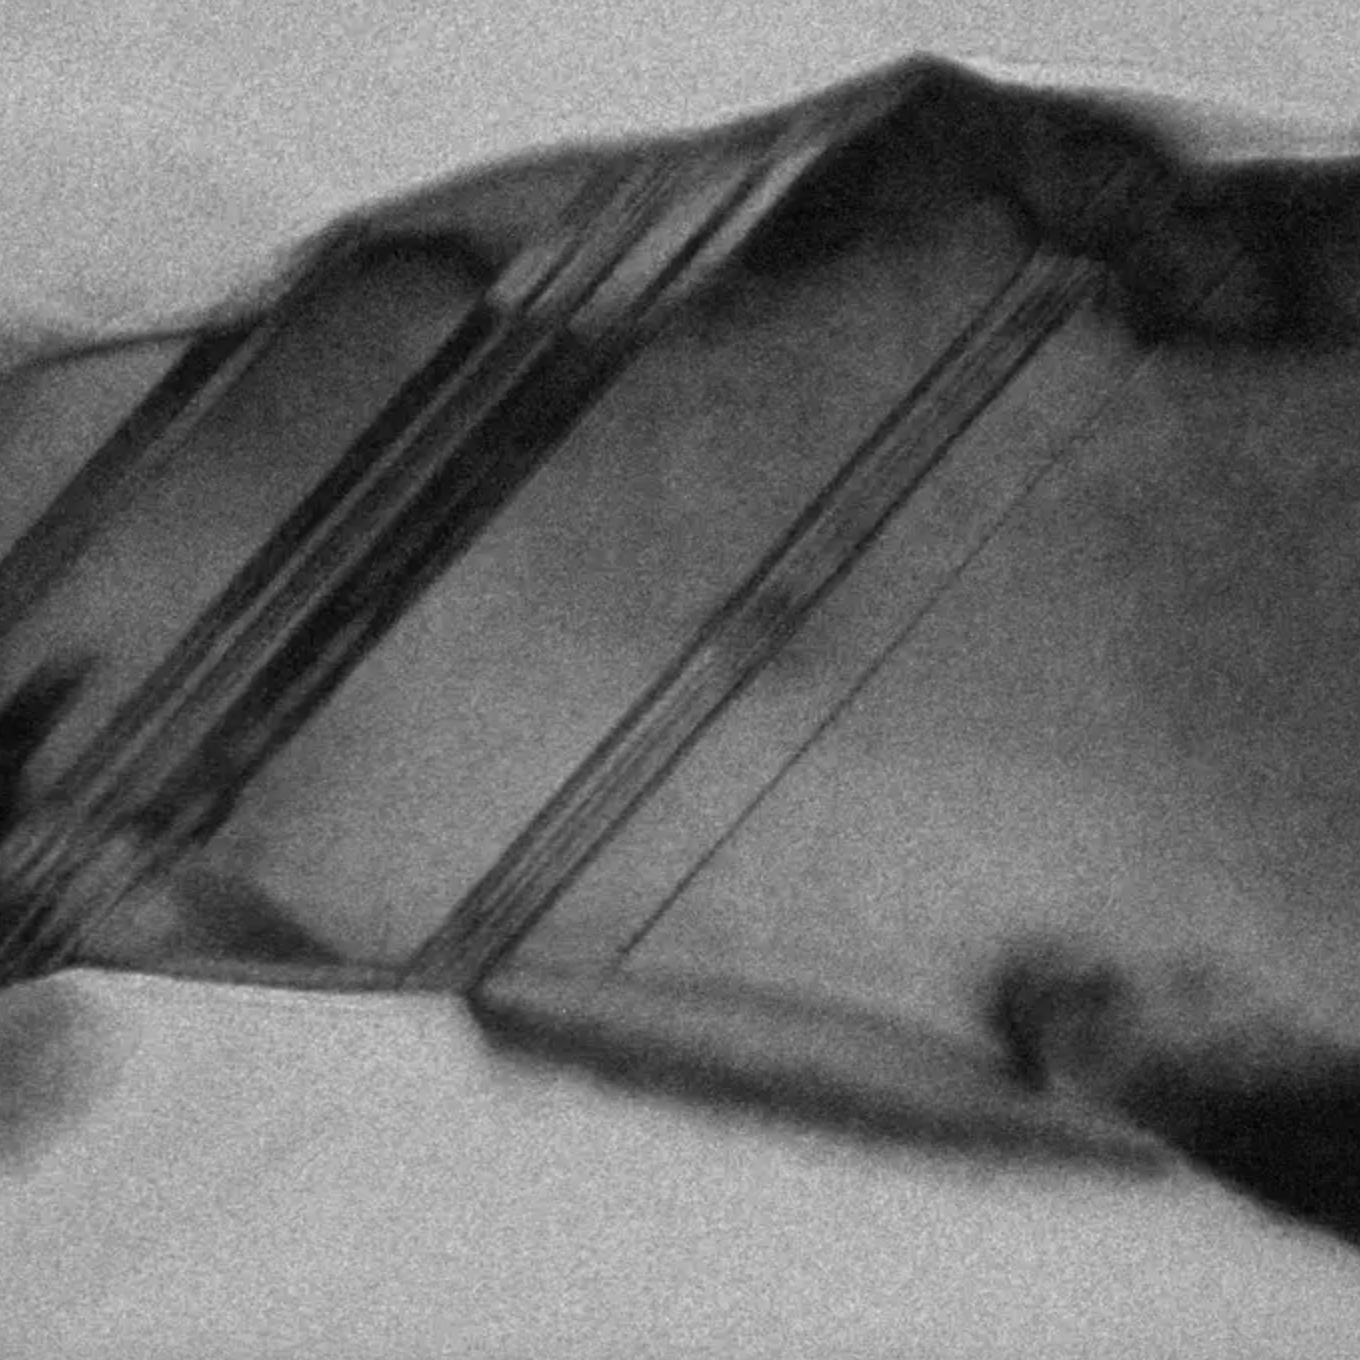 After 34 Years, Scientists Finally Made a Synthetic Material Nearly as Hard as Diamonds